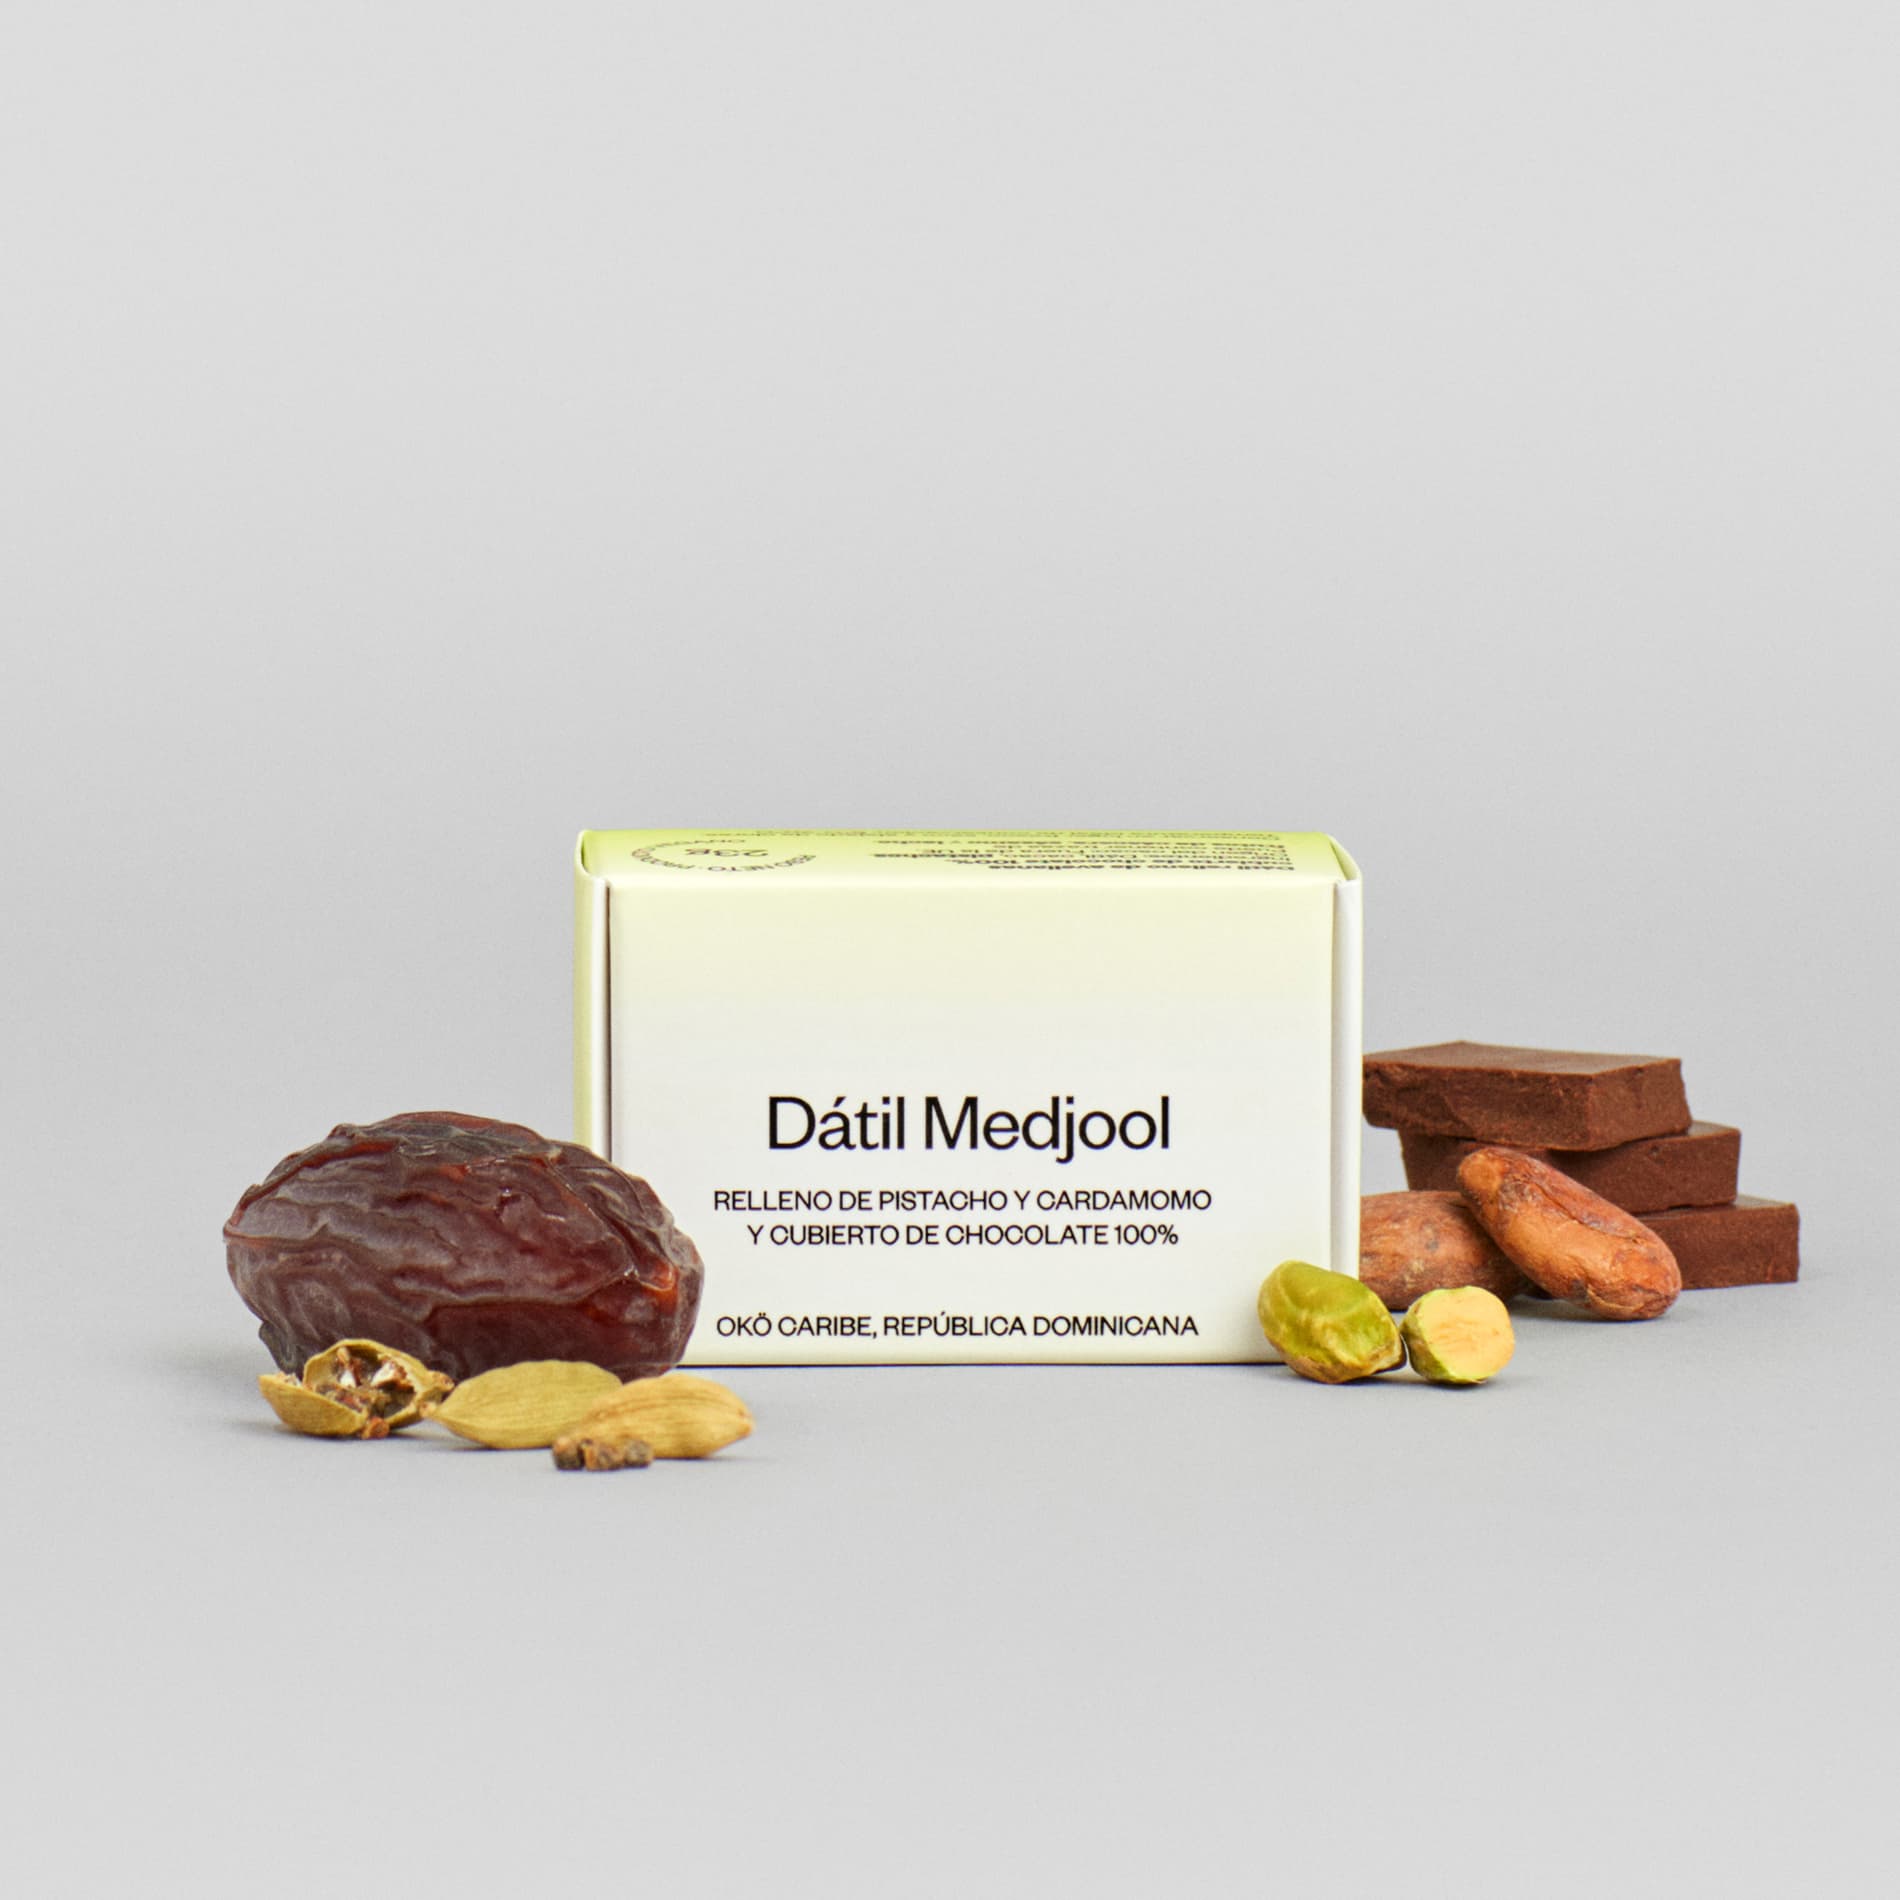 Medjool Date Filled With Pistachios And Cardamon Covered with 100% Chocolate